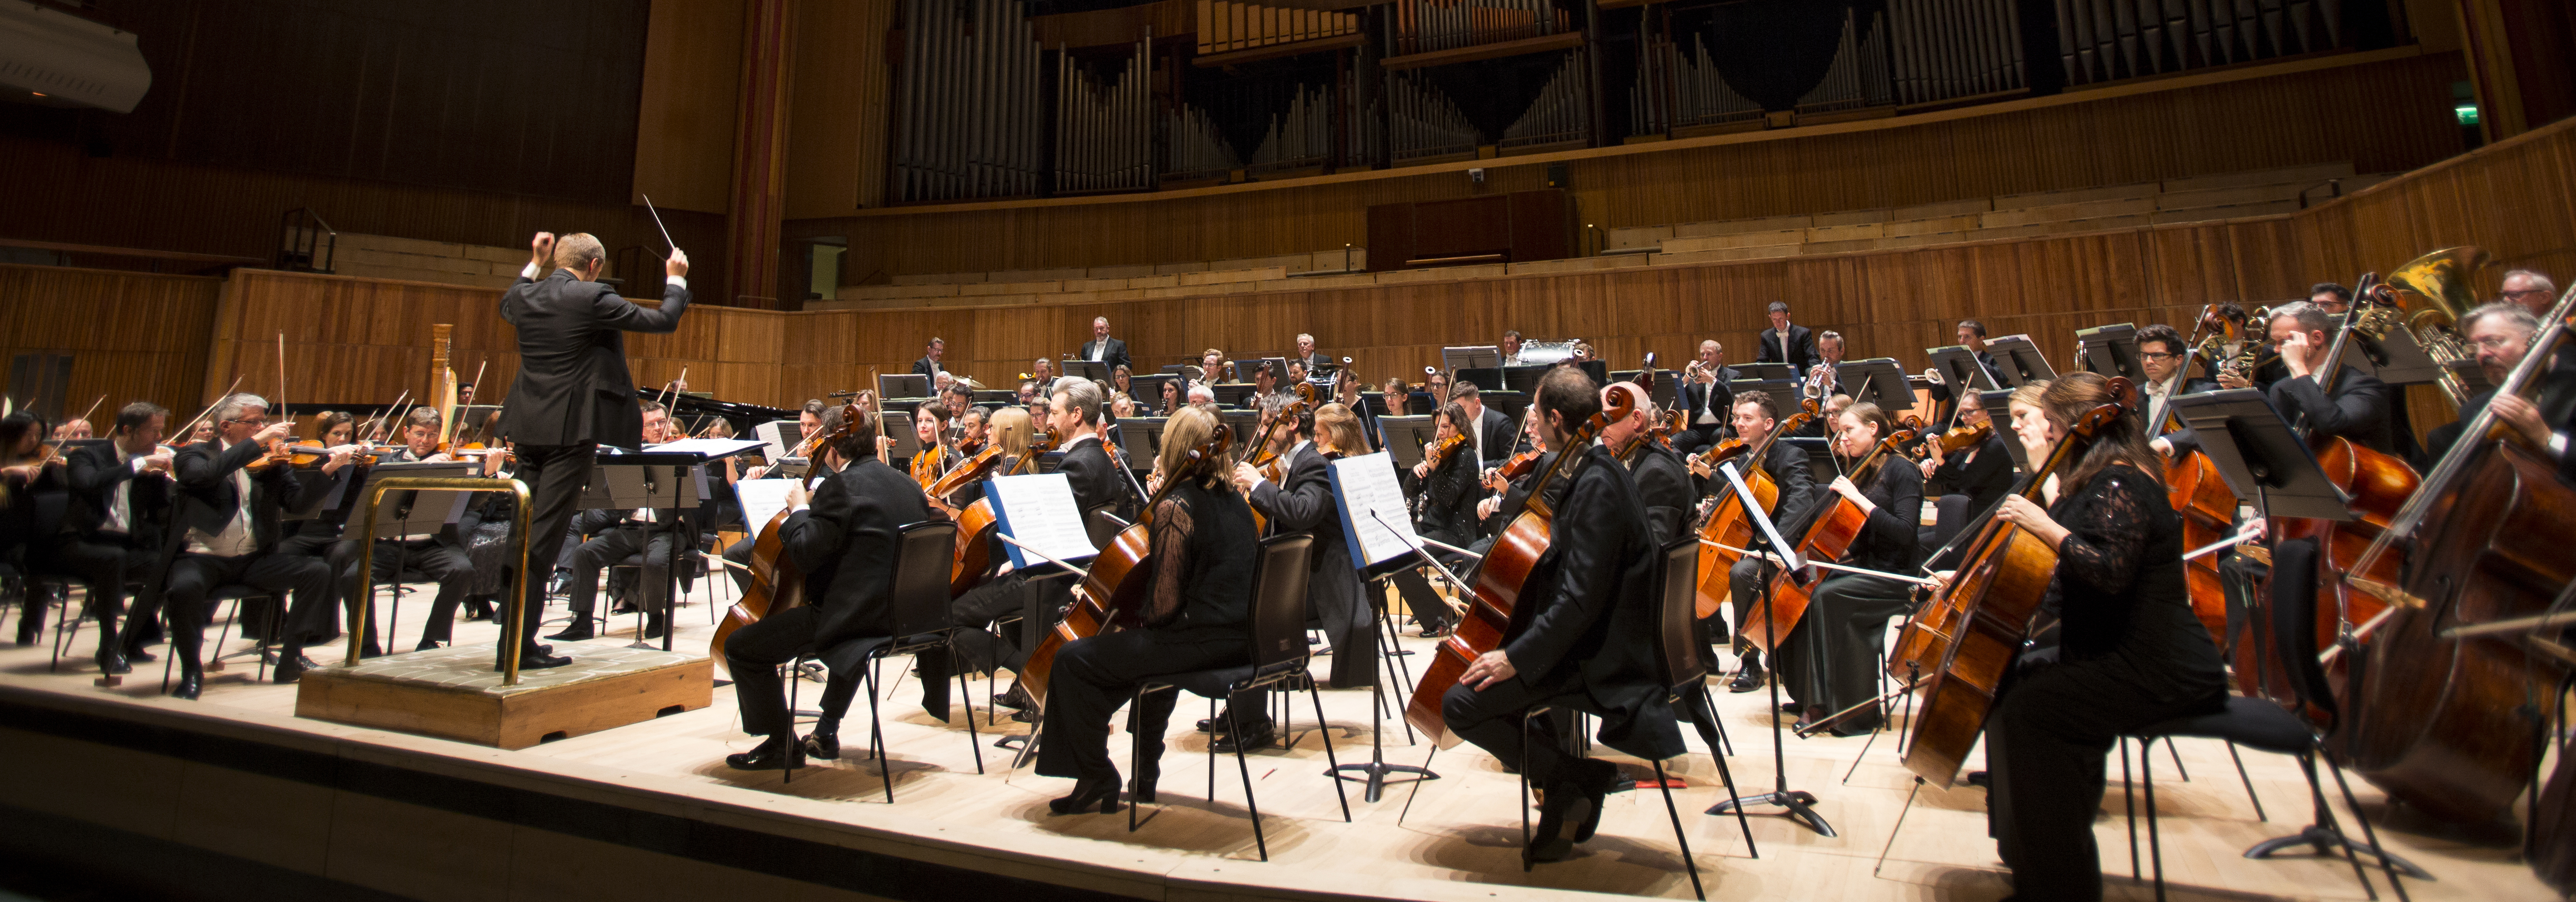 an image of Vasily Petrenko conducting the RPO at the Southbank Centre